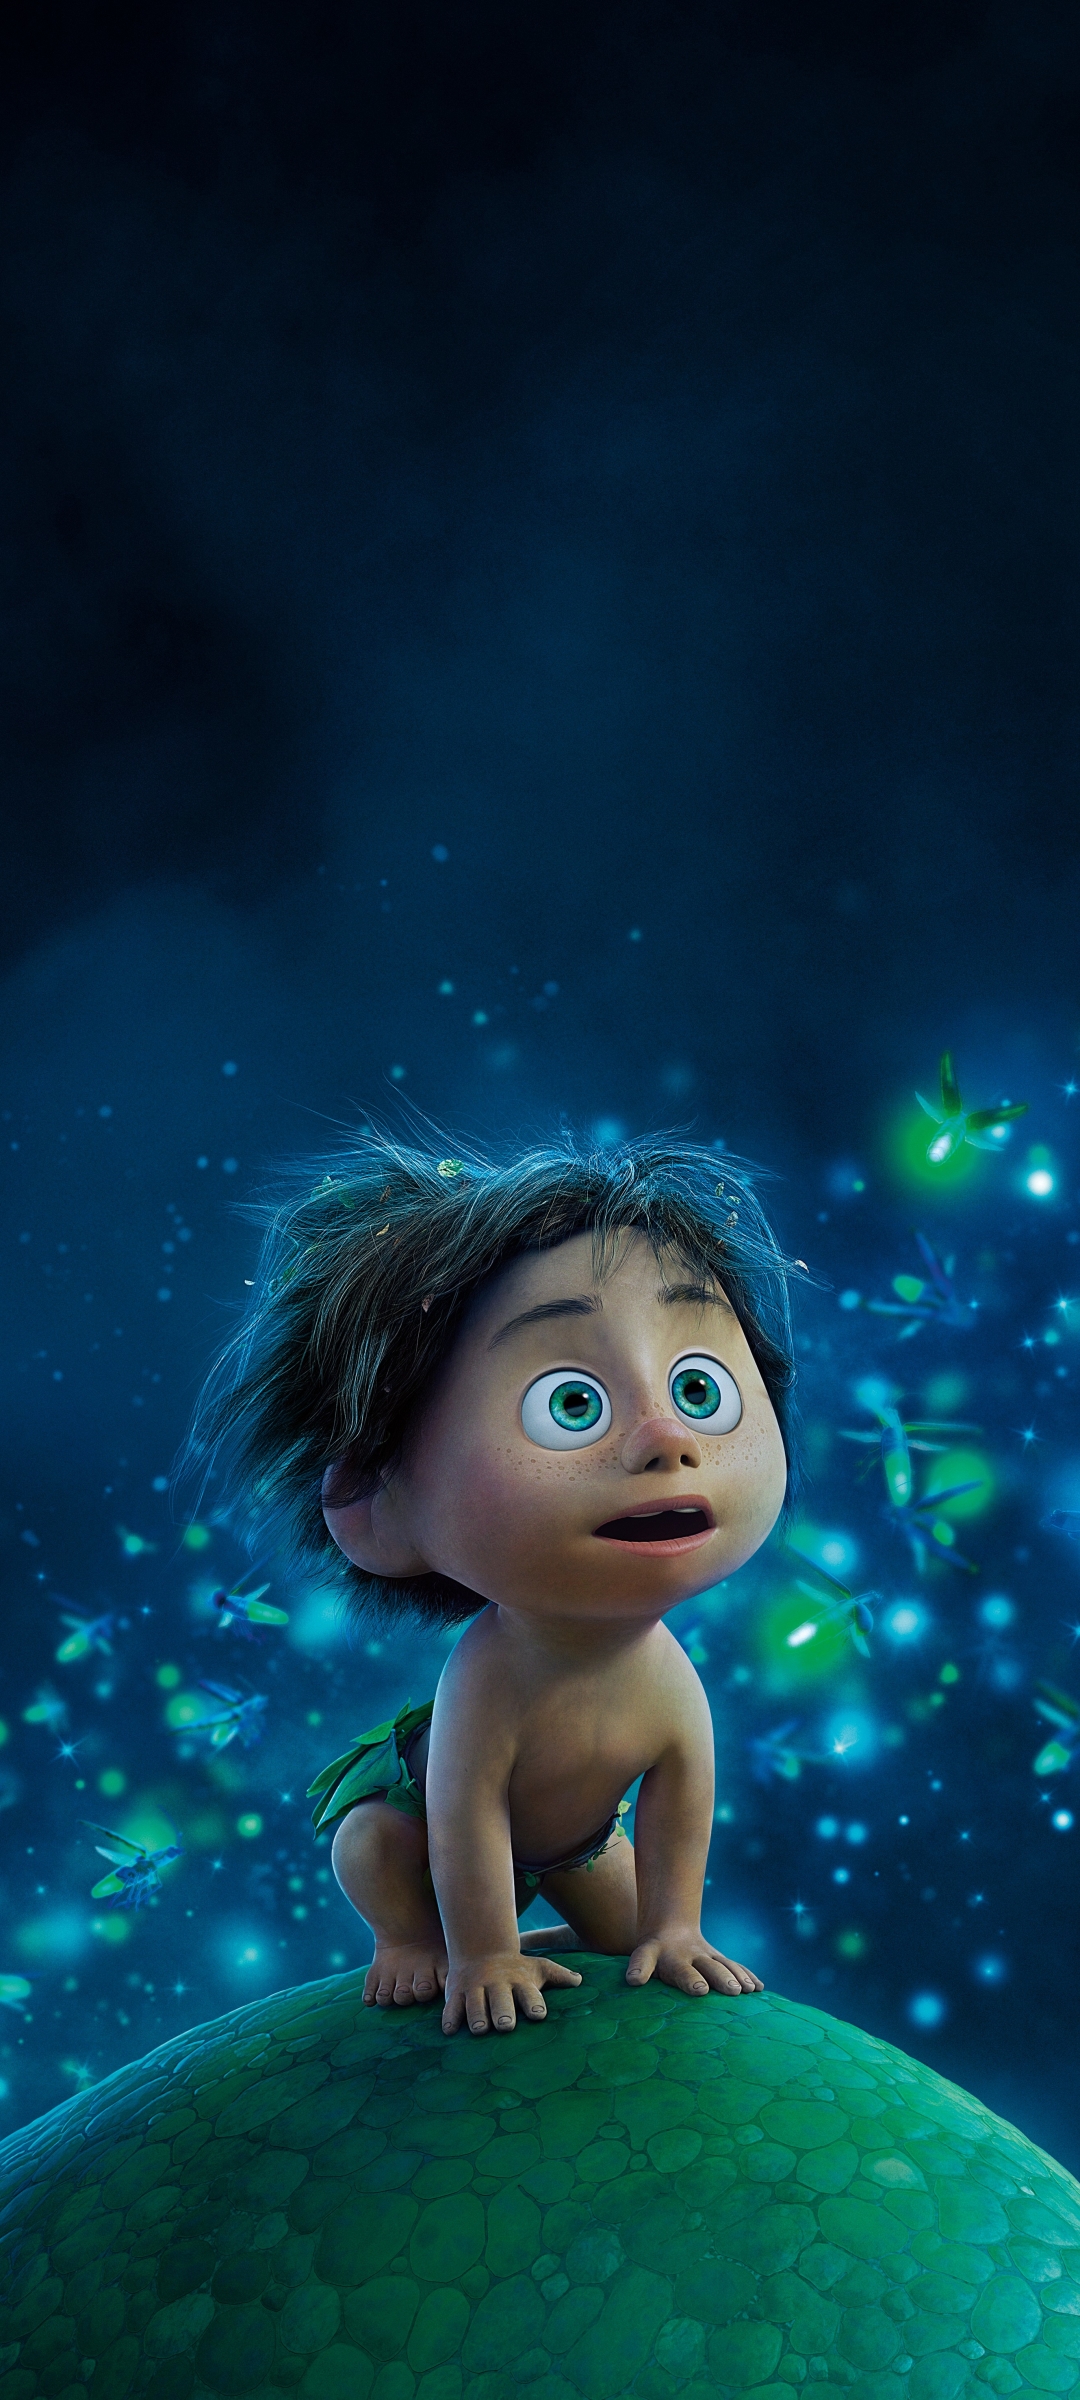 The Good Dinosaur Phone Wallpaper - Mobile Abyss